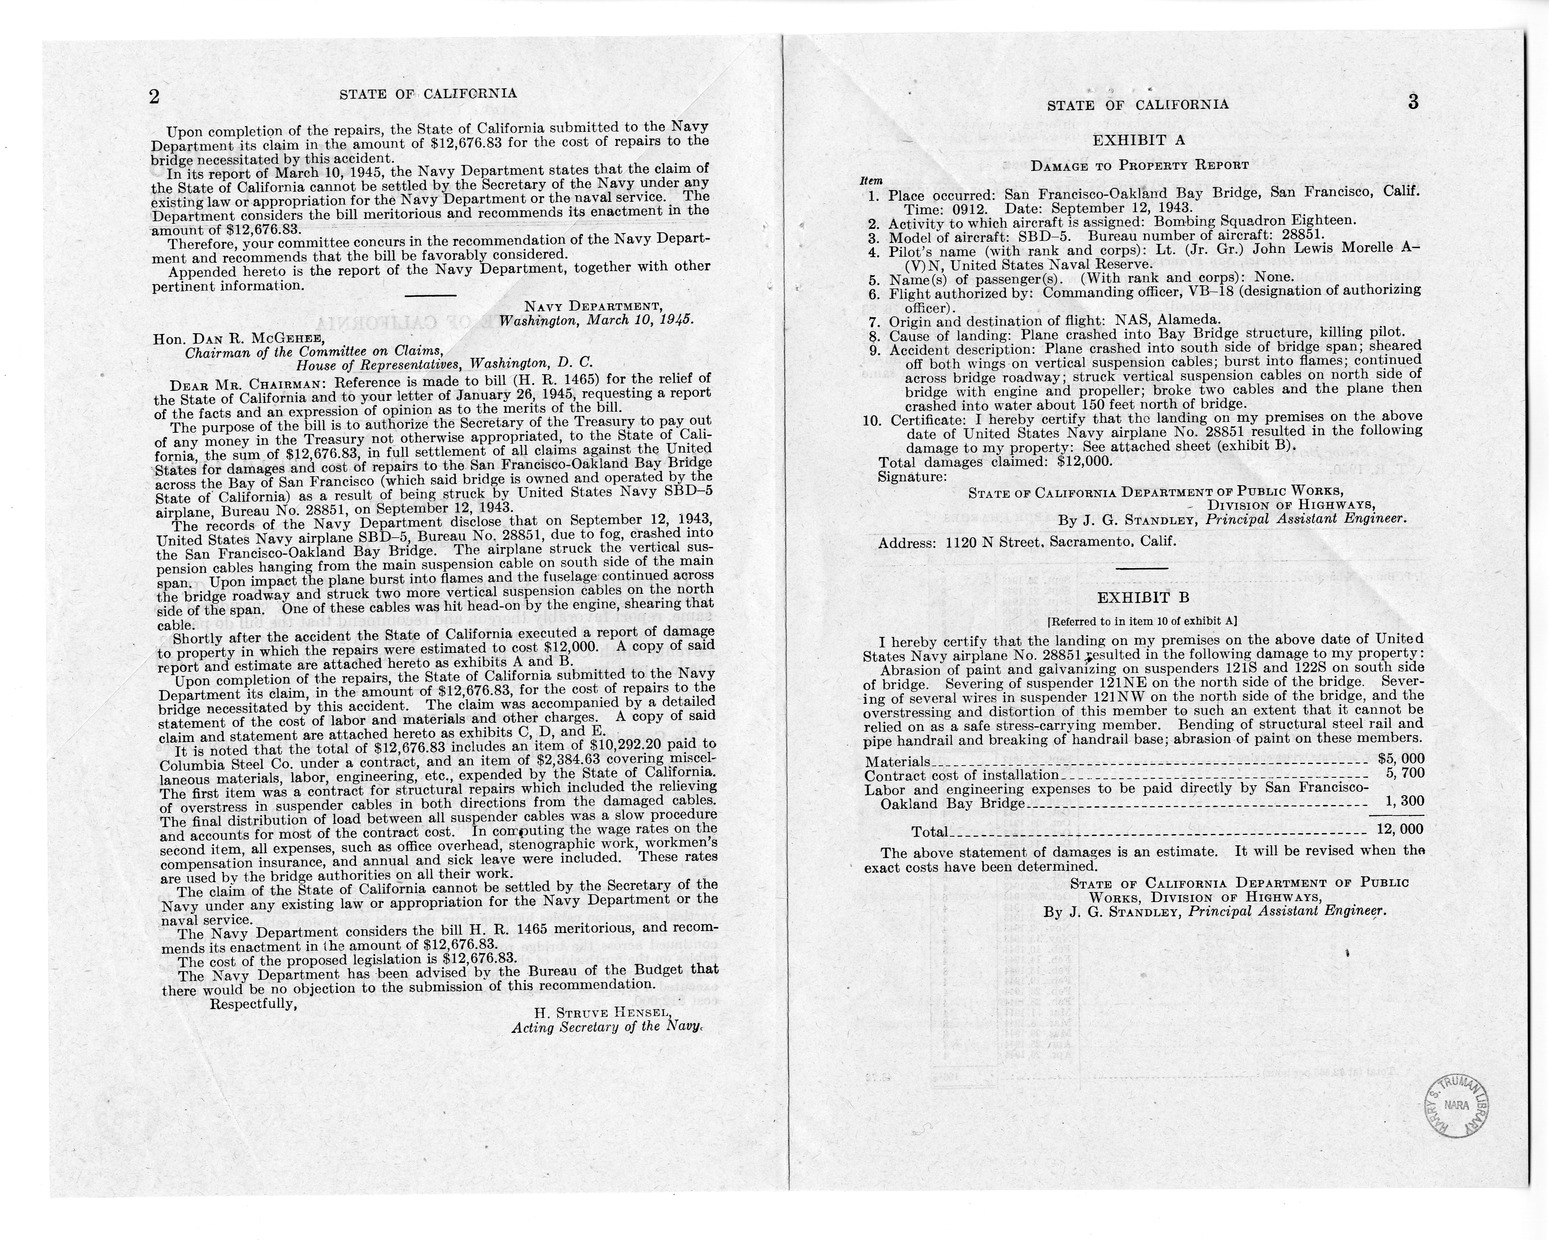 Memorandum from Frederick J. Bailey to M. C. Latta, H.R. 1465, For the Relief of the State of California, with Attachments